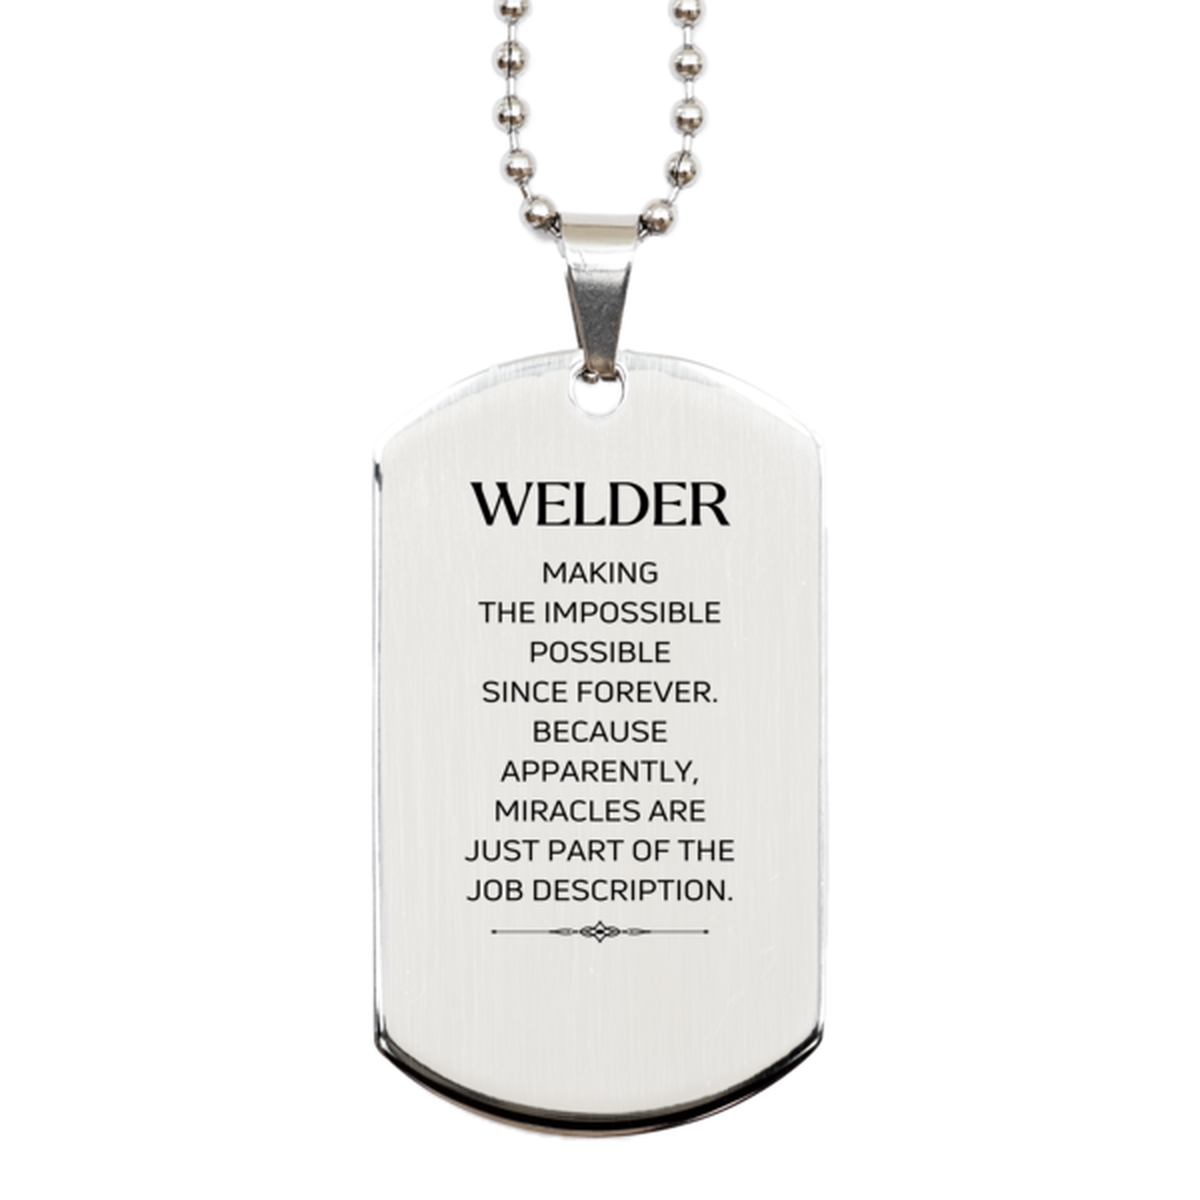 Funny Welder Gifts, Miracles are just part of the job description, Inspirational Birthday Silver Dog Tag For Welder, Men, Women, Coworkers, Friends, Boss